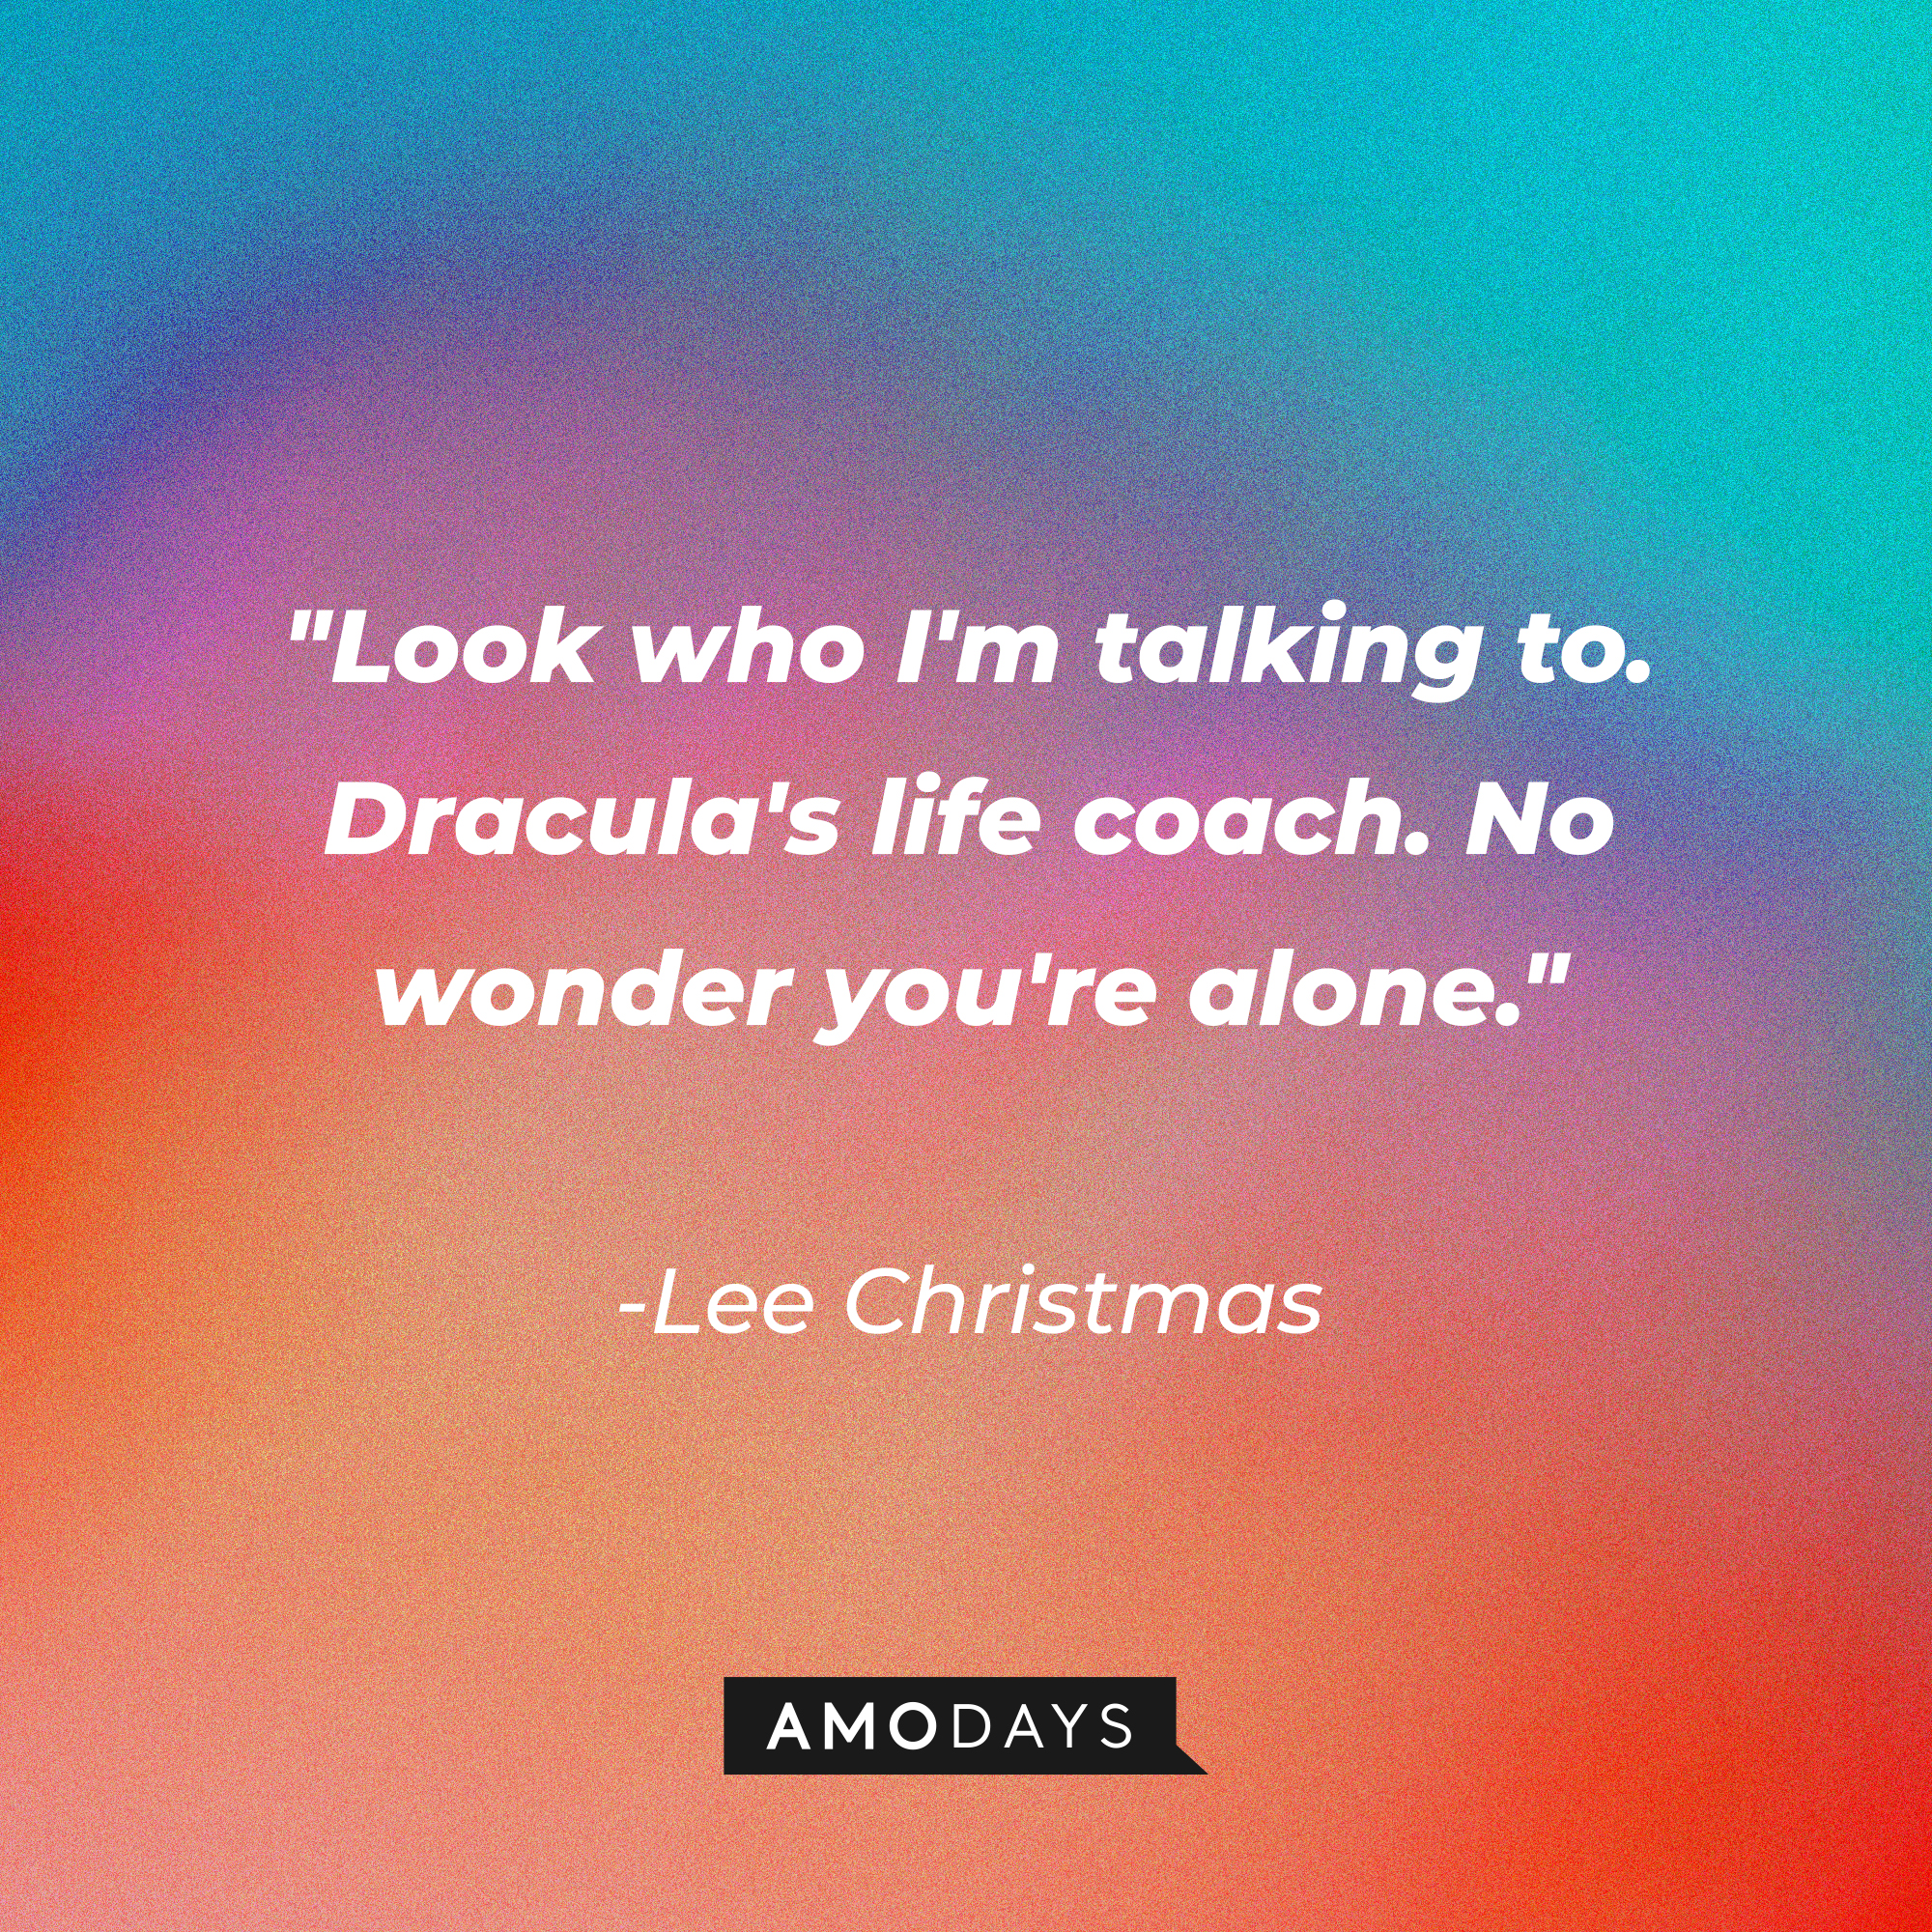 Lee Christmas’ quote: "Look who I'm talking to. Dracula's life coach. No wonder you're alone." | Source: AmoDays